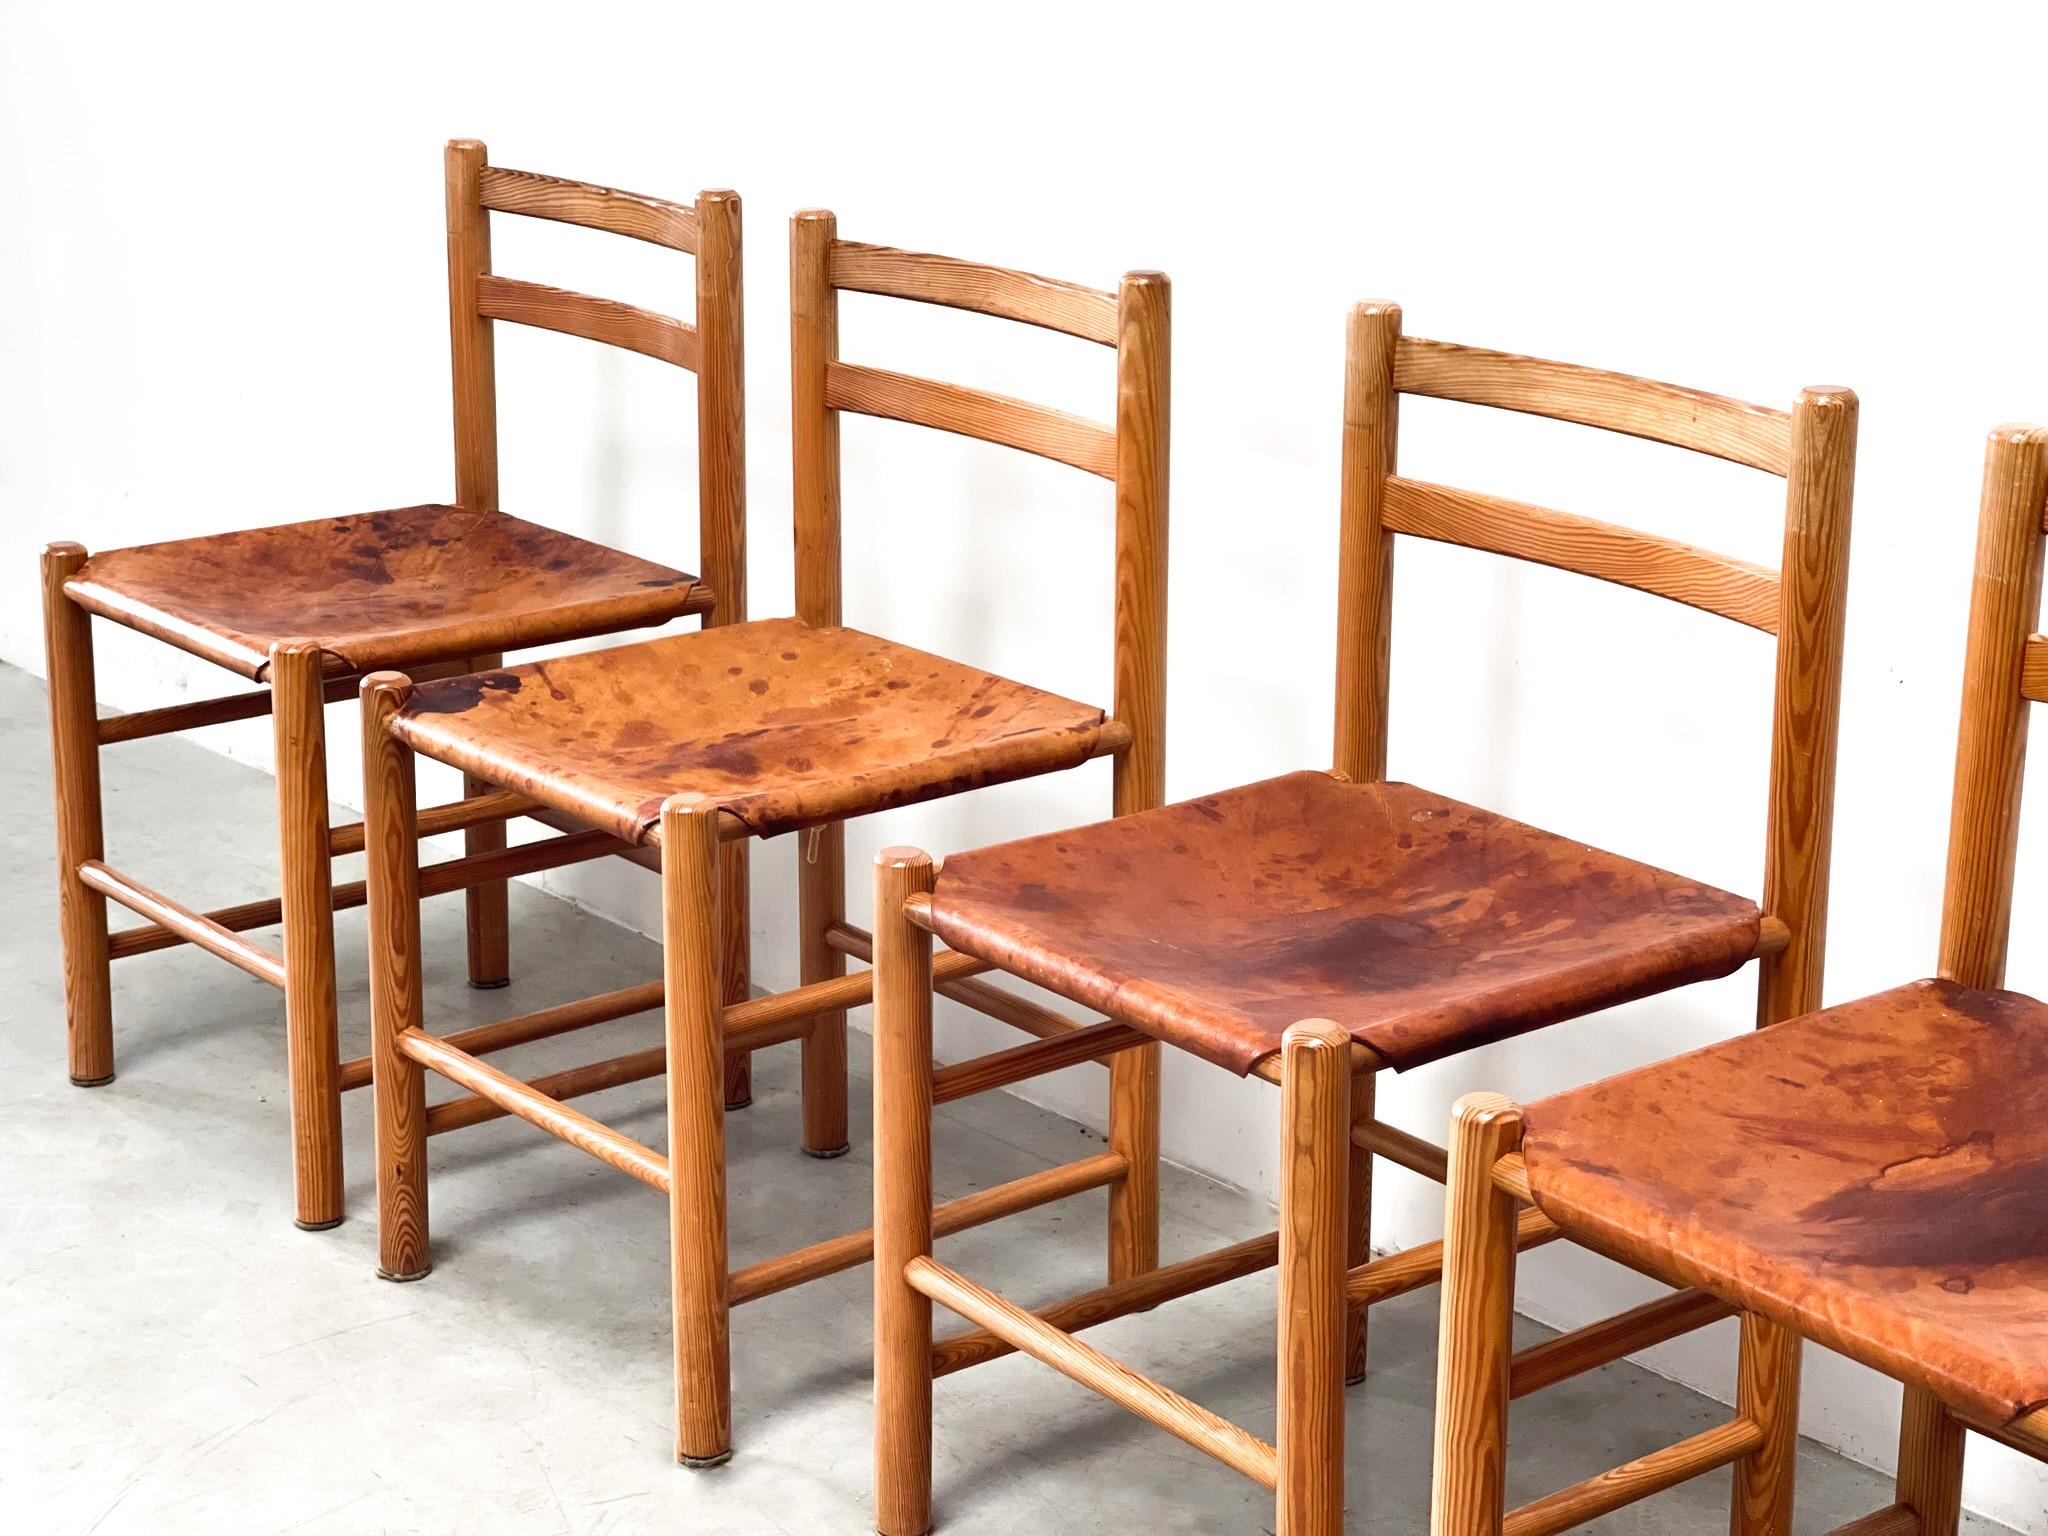 Dutch Five Ate van Apeldoorn patinated leather dining chairs